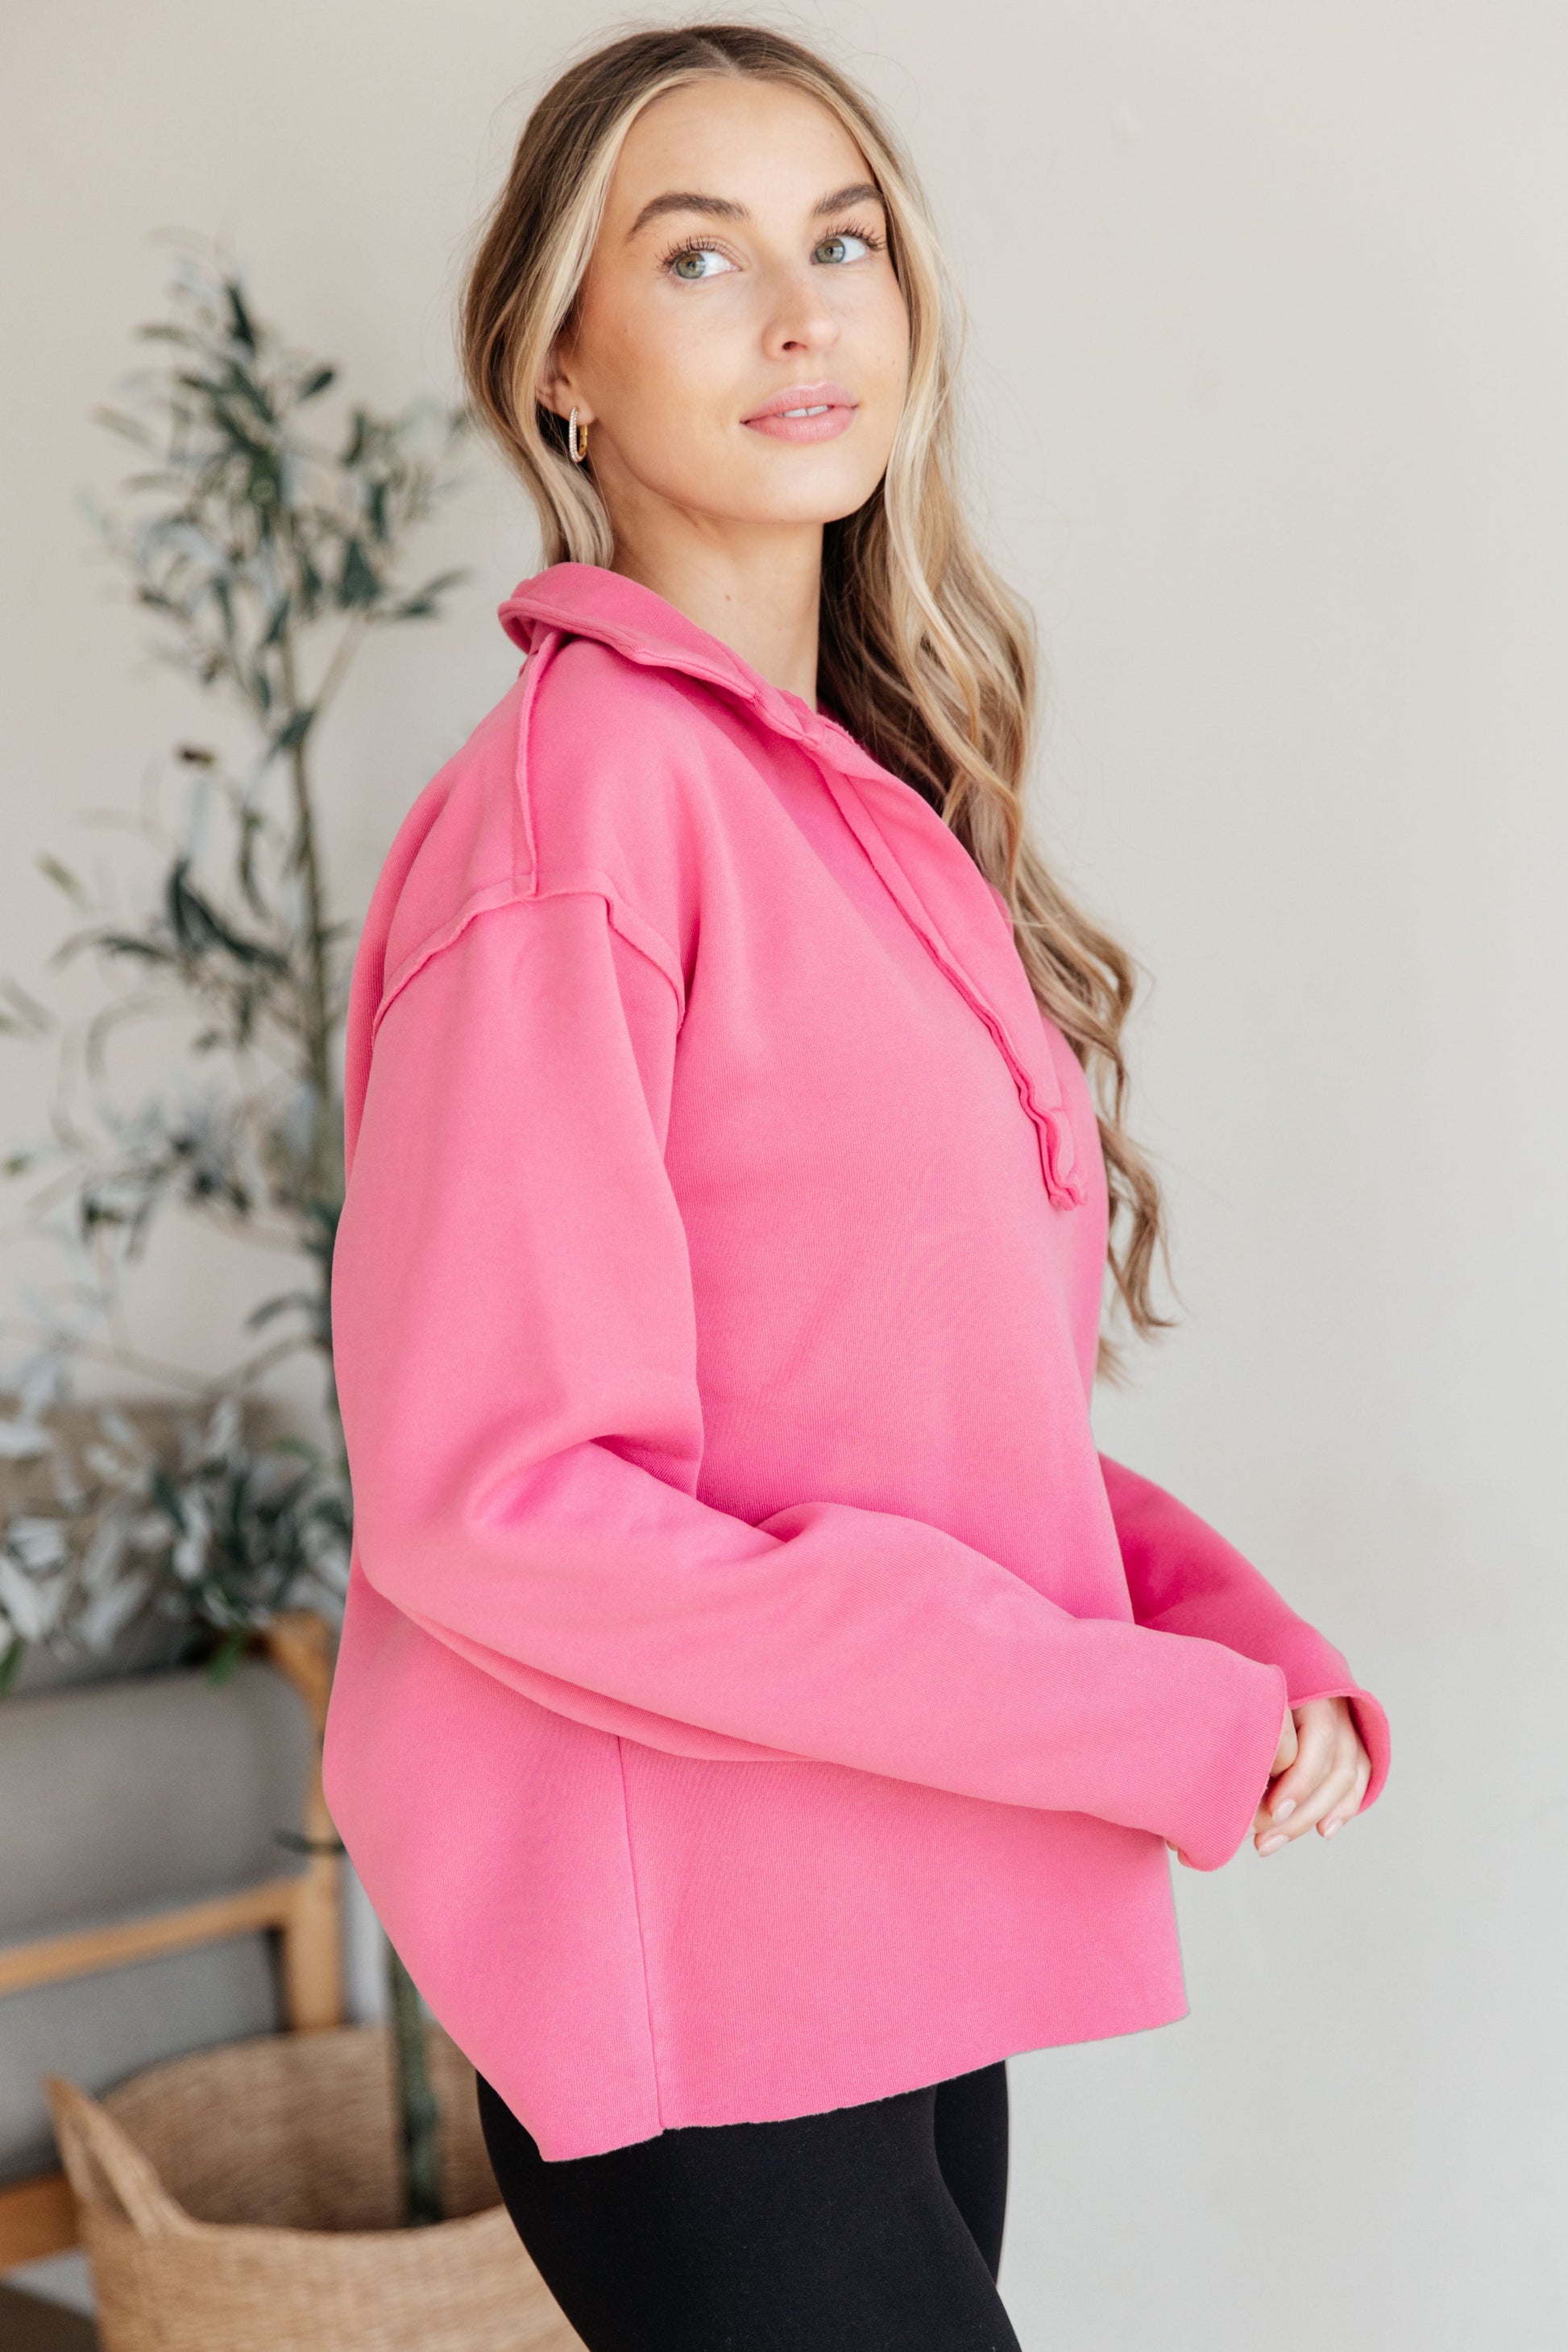 Same Ol’ Situation Collared Pullover in Hot Pink - Womens